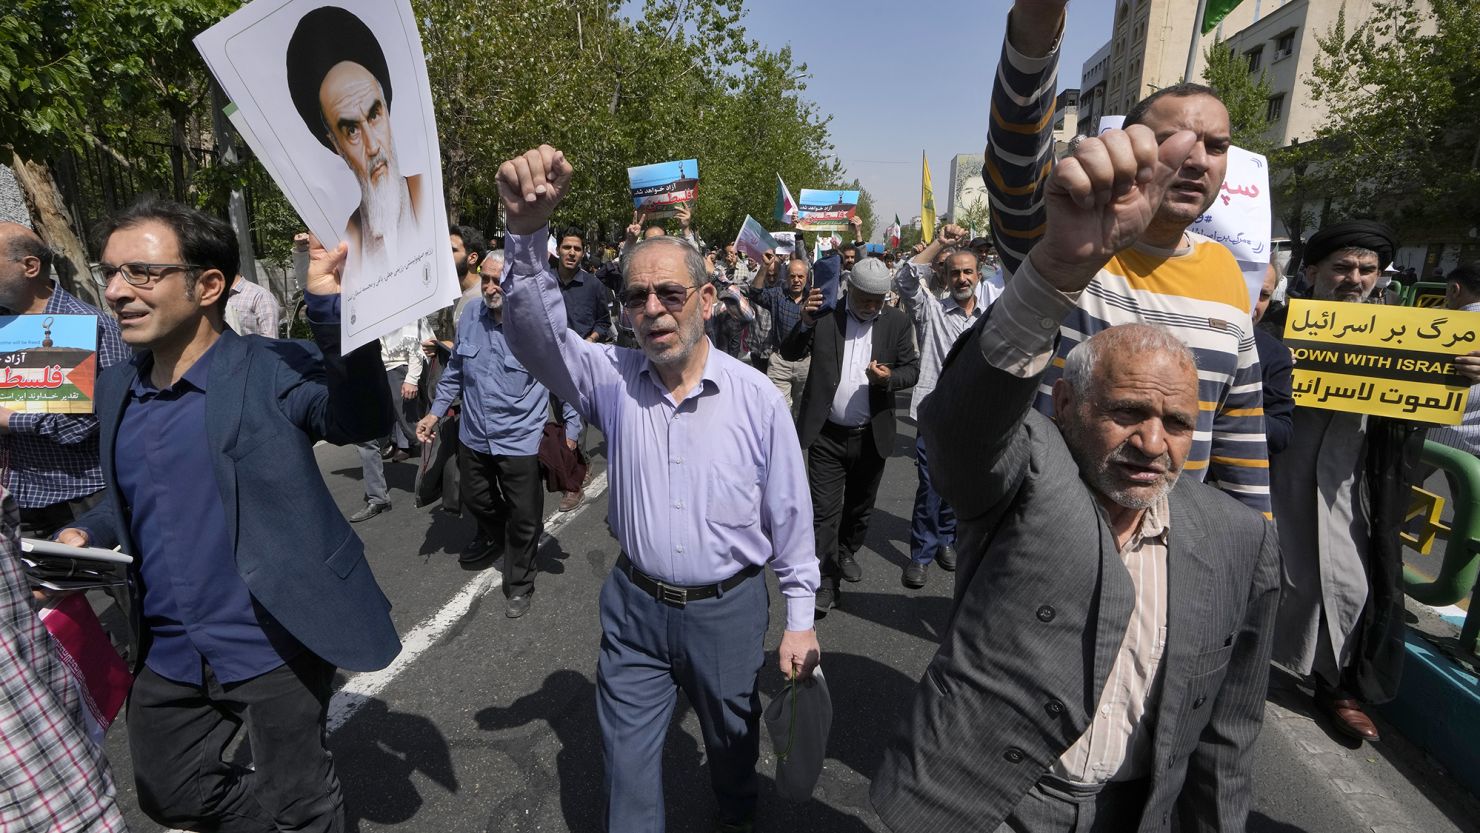 Iranian worshippers chant slogans as they hold a poster of the late revolutionary founder Ayatollah Khomeini and an anti-Israeli placard during an anti-Israeli gathering after Friday prayers in Tehran, Iran on Friday.